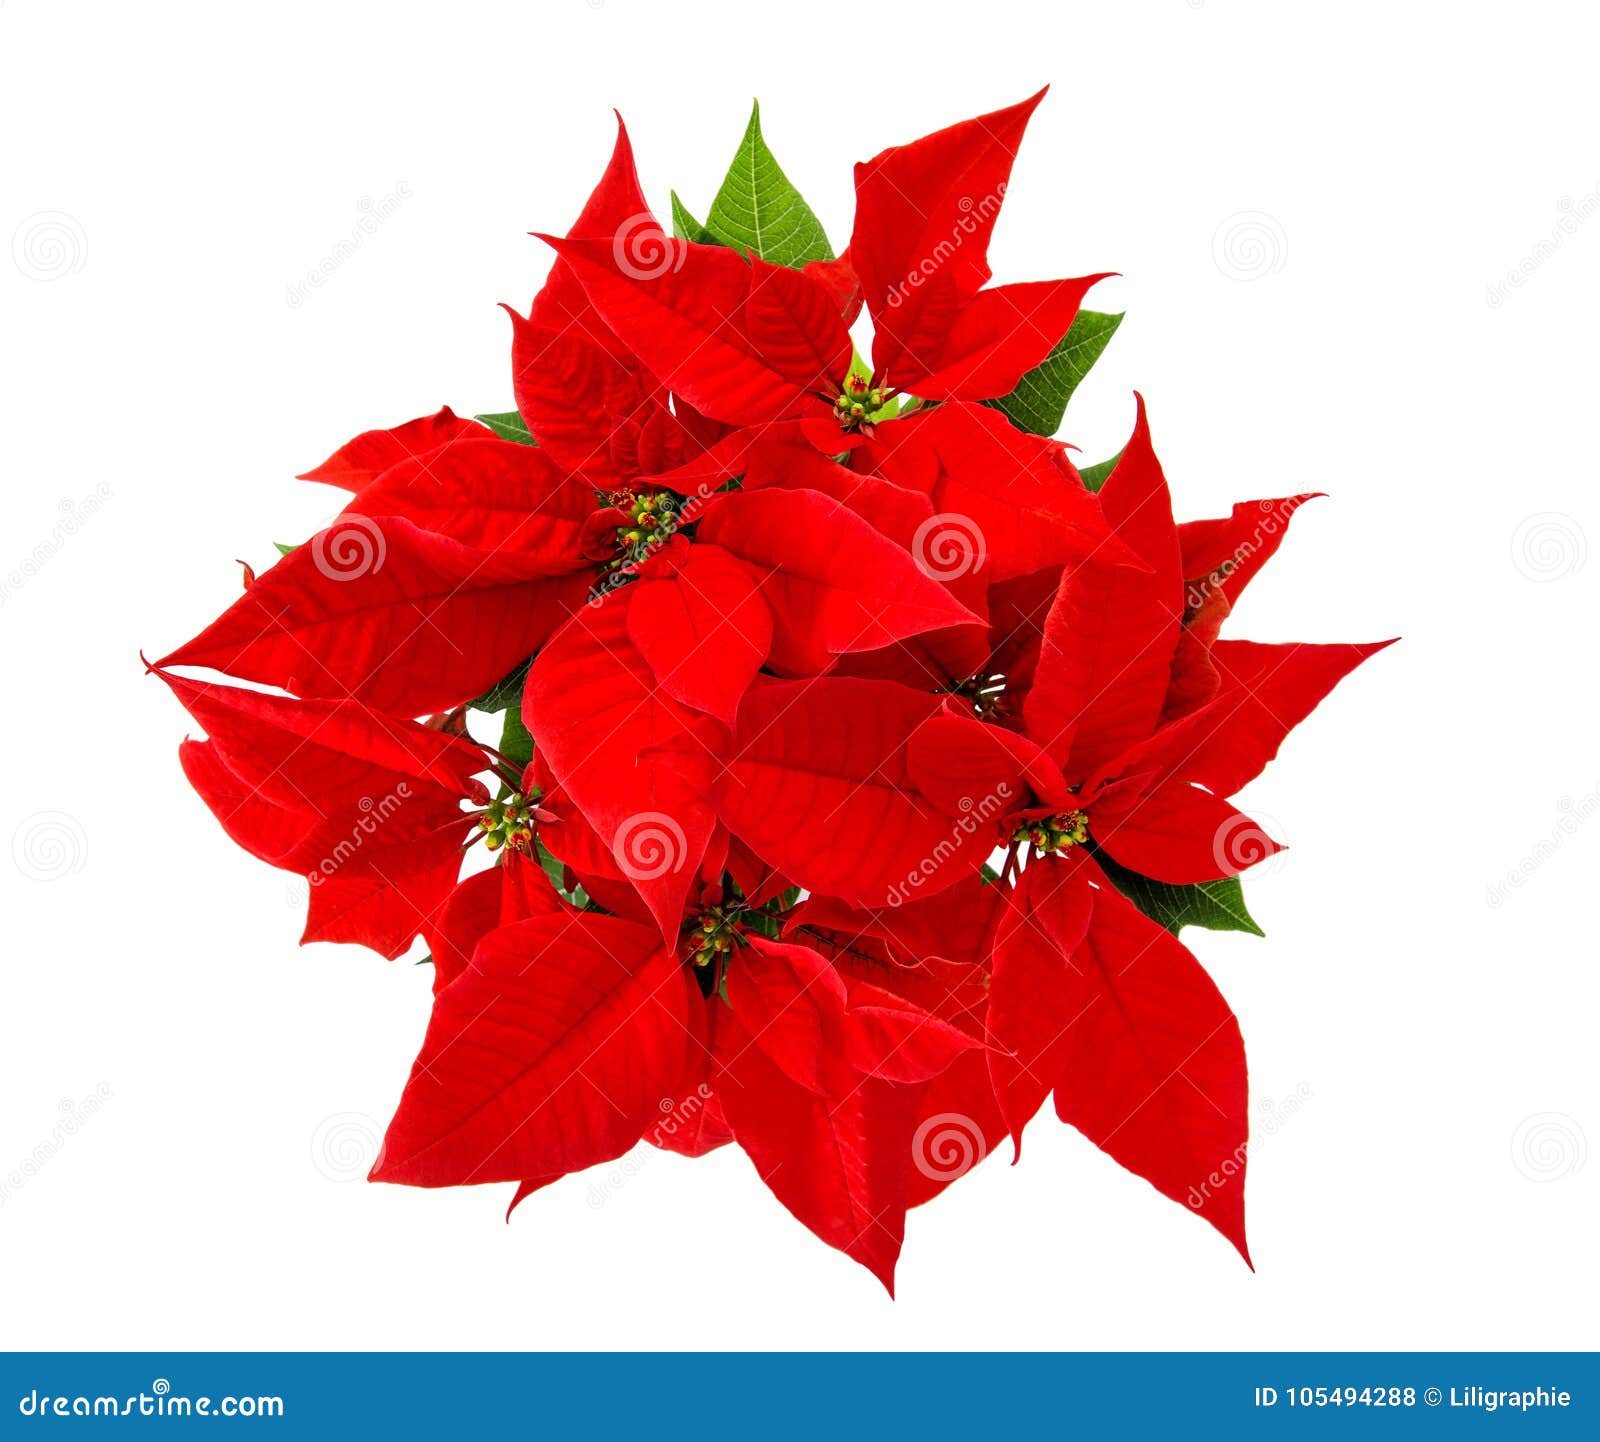 Red Poinsettia Christmas Flower Isolated White Background Stock Photo ...